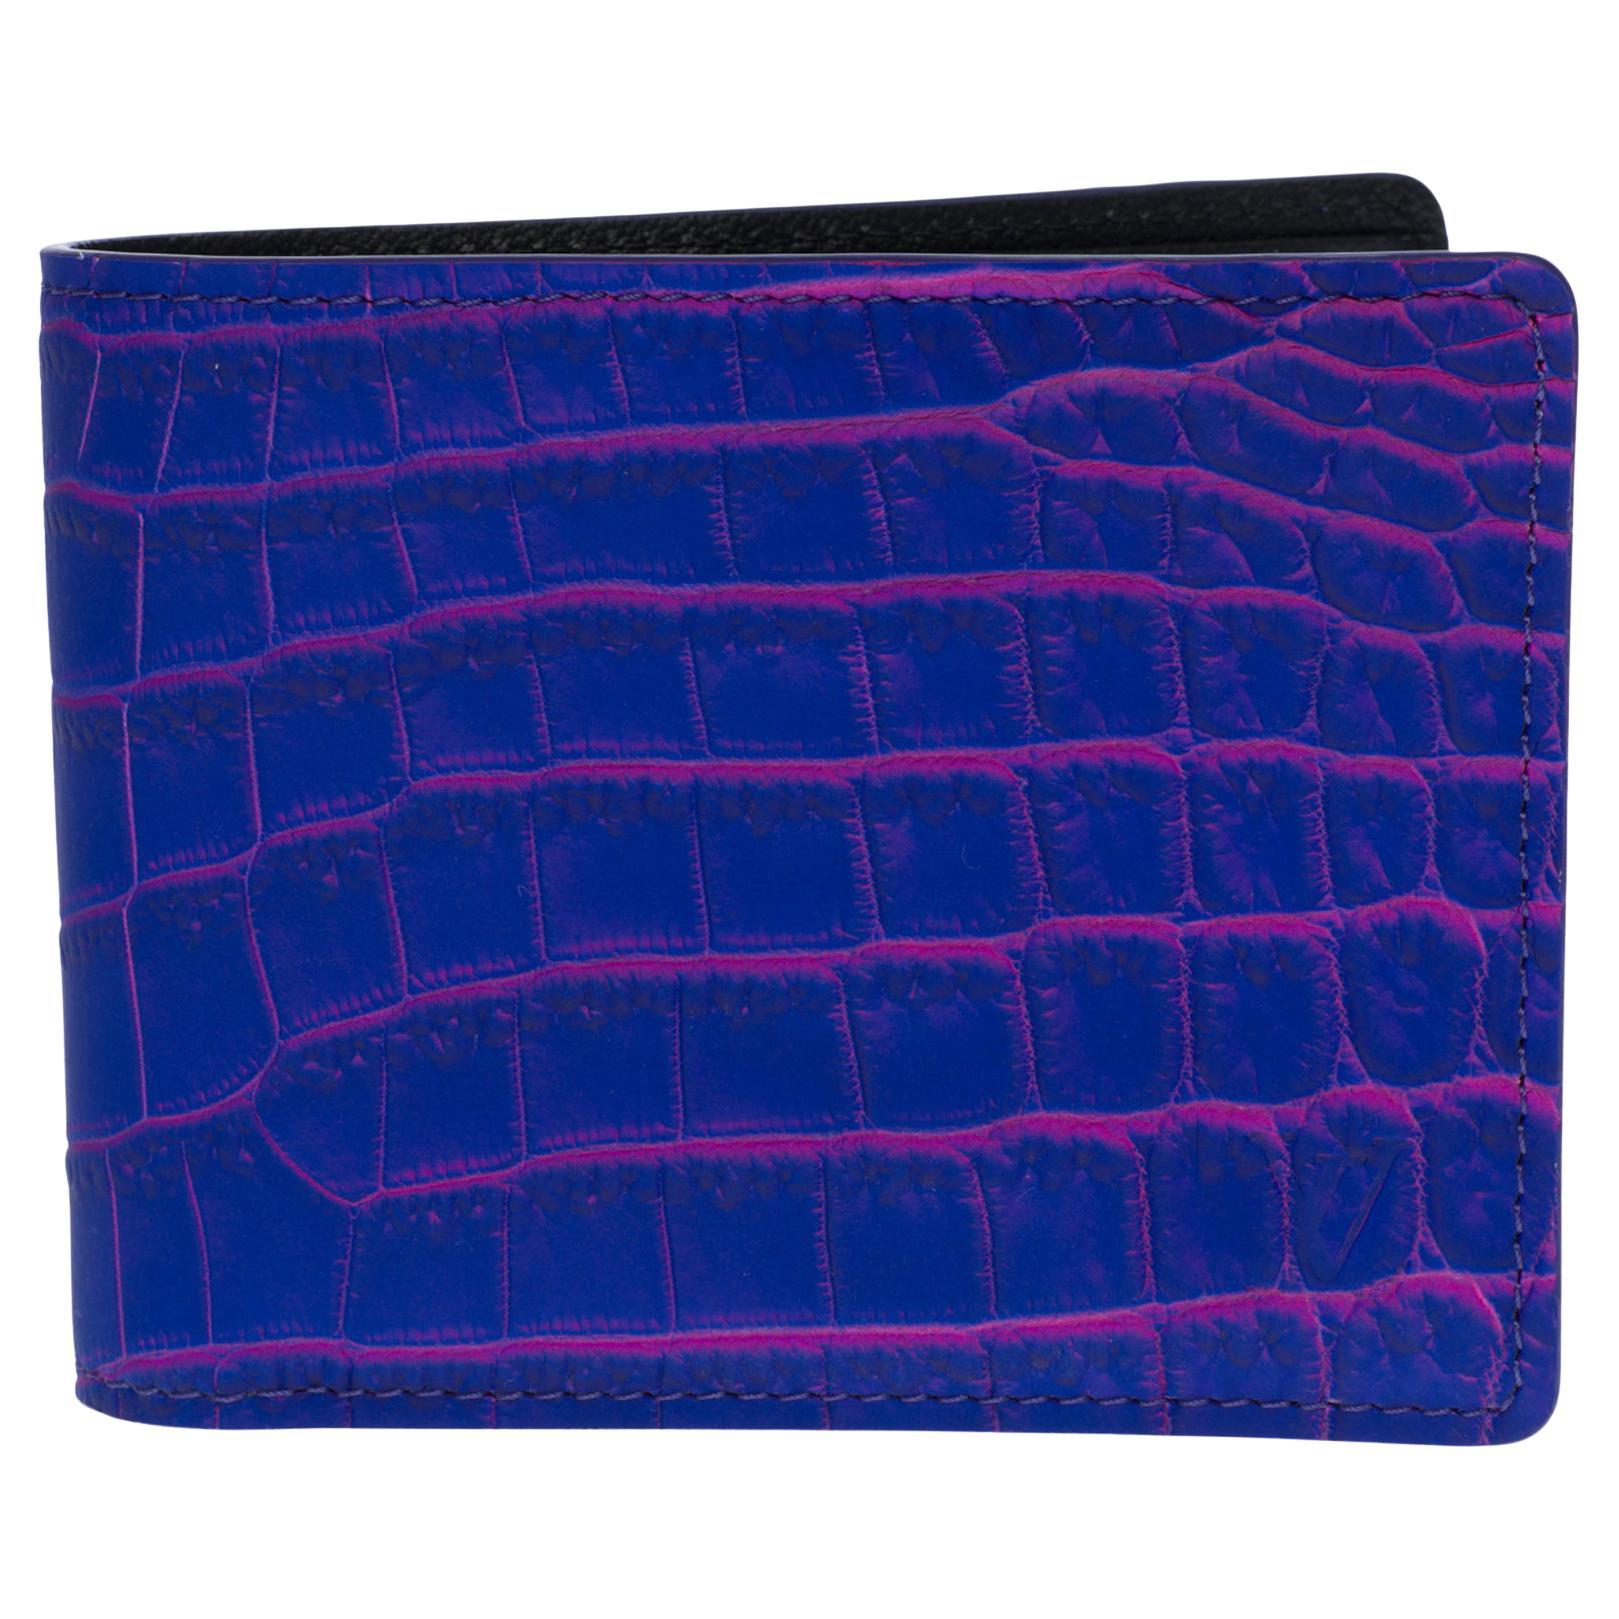 New-Rare Virgil Abloh FW 2022-Multiple Wallet in Blue/Pink Crocodile leather